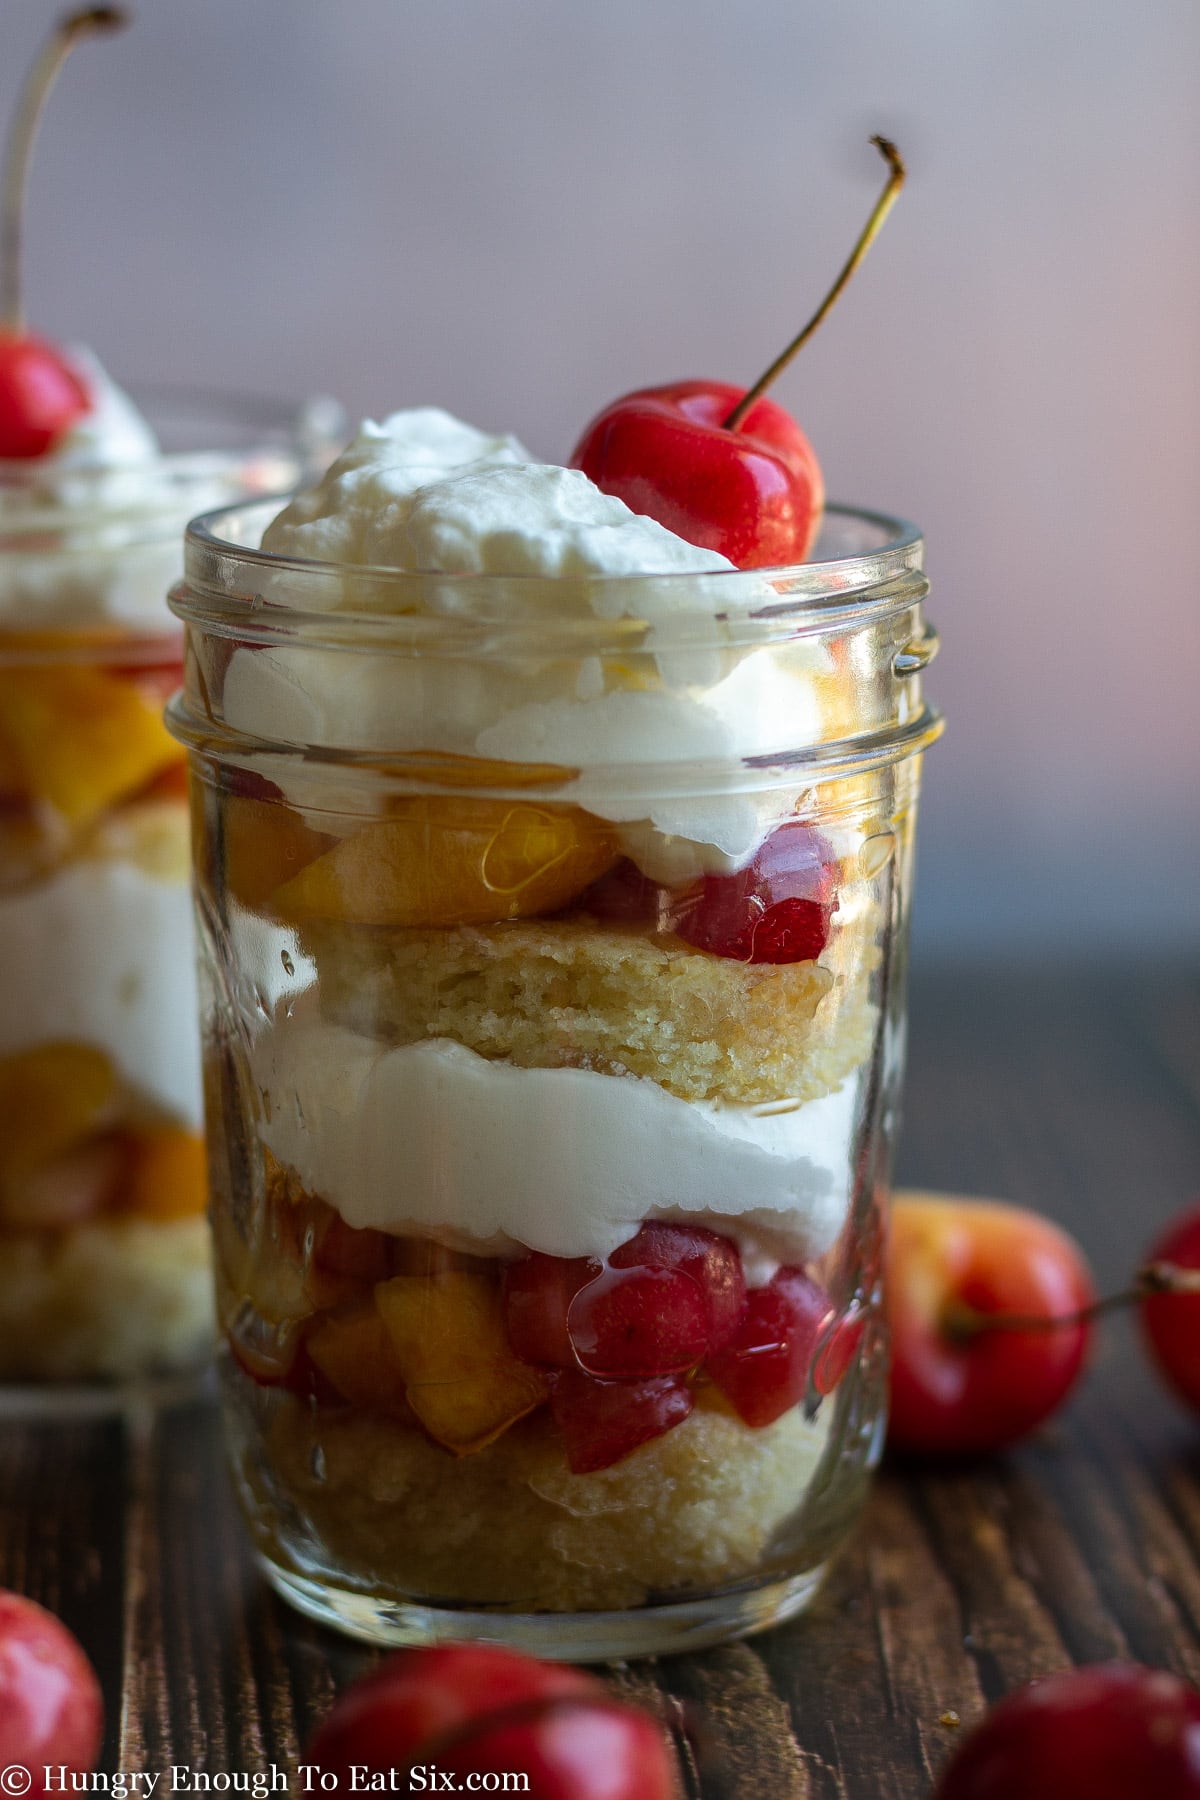 A cherry nectarine trifle in a glass jar with a cherry on top.